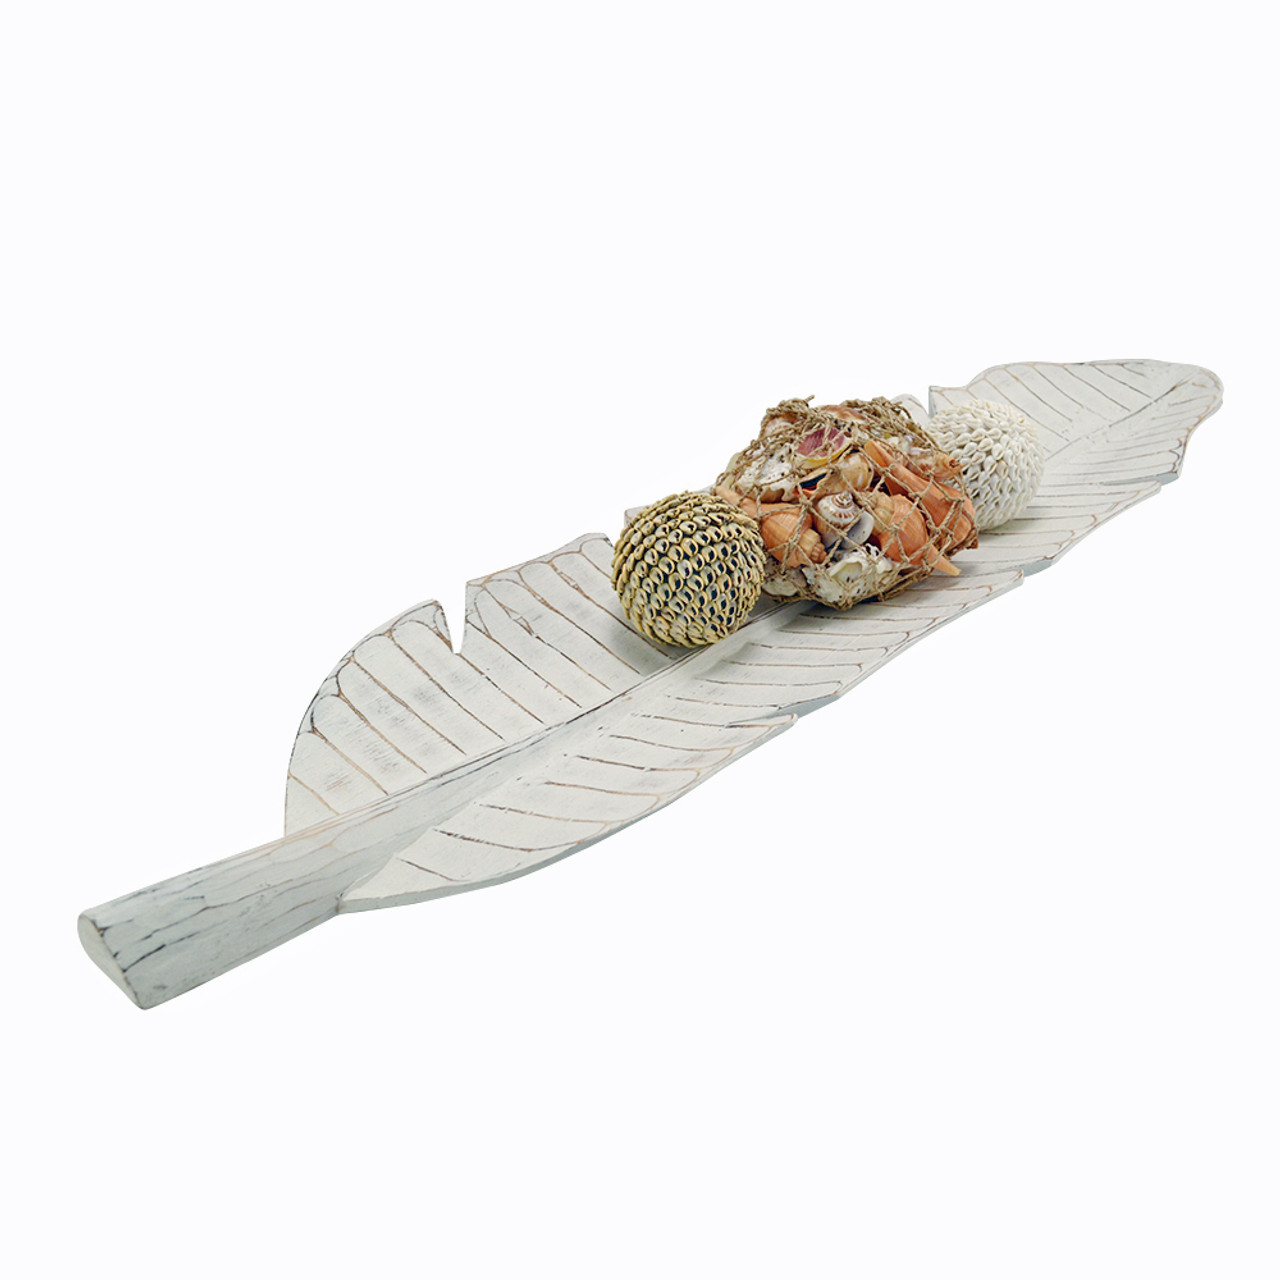 Hamptons wood carved large Banana Leaf tray
80cm x 20cm
white wash
Also comes in 60cm & 40cm size